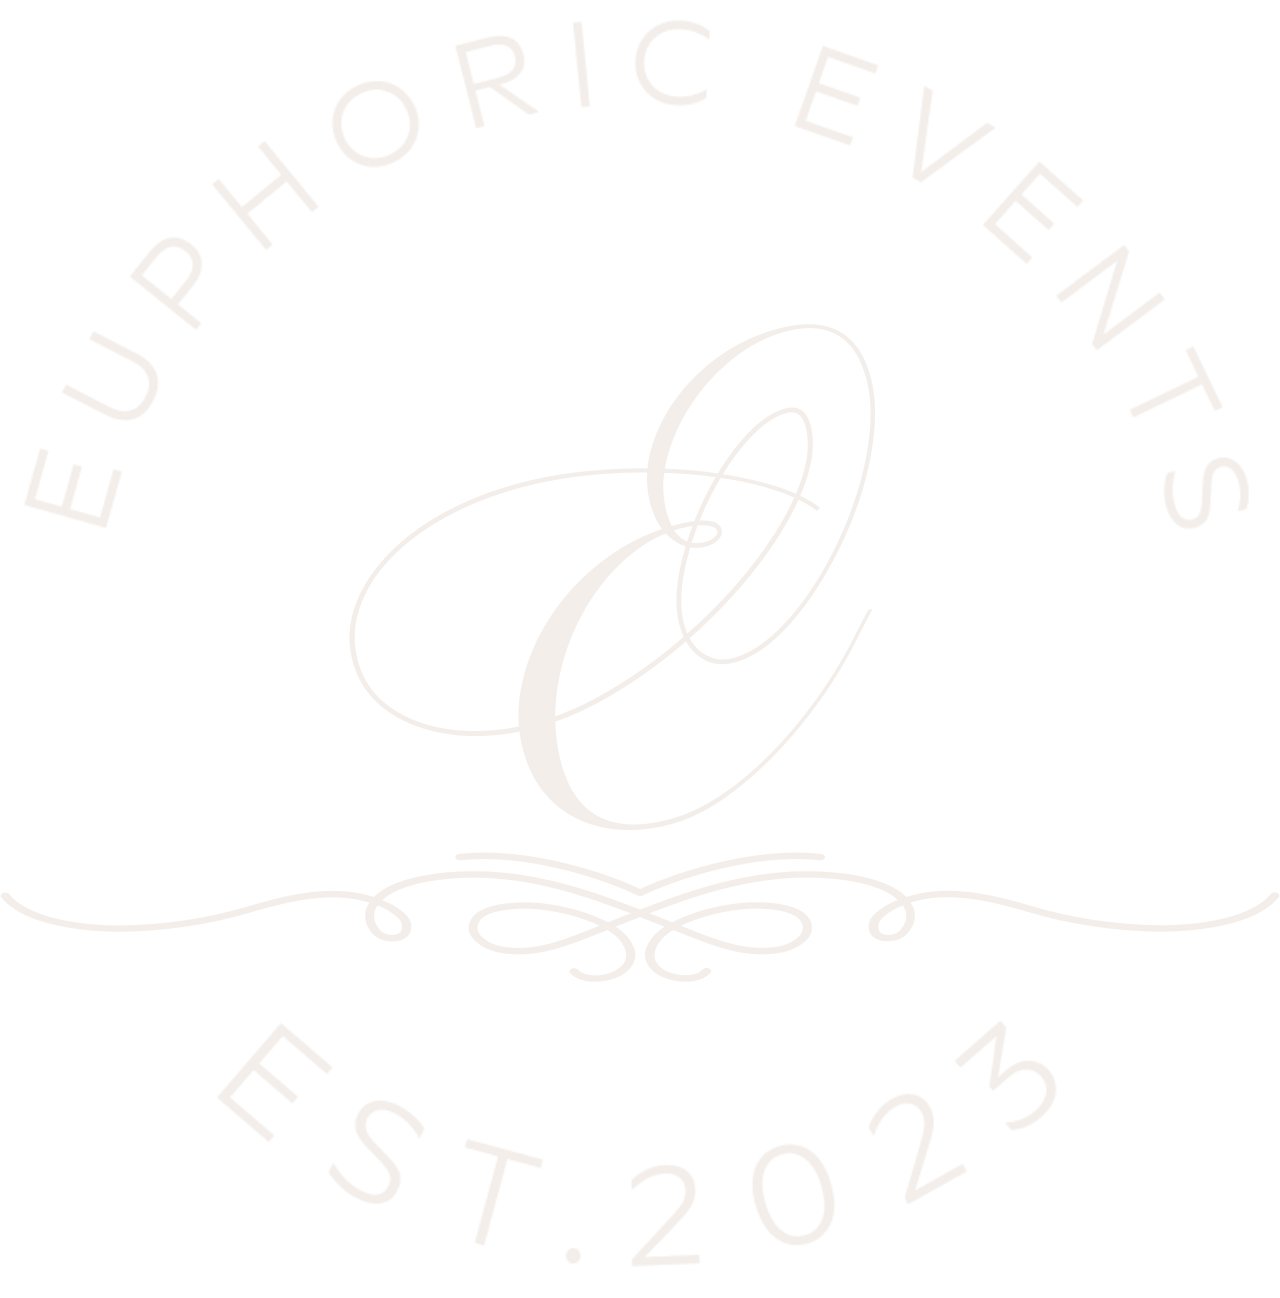 EUPHORIC EVENTS's web page